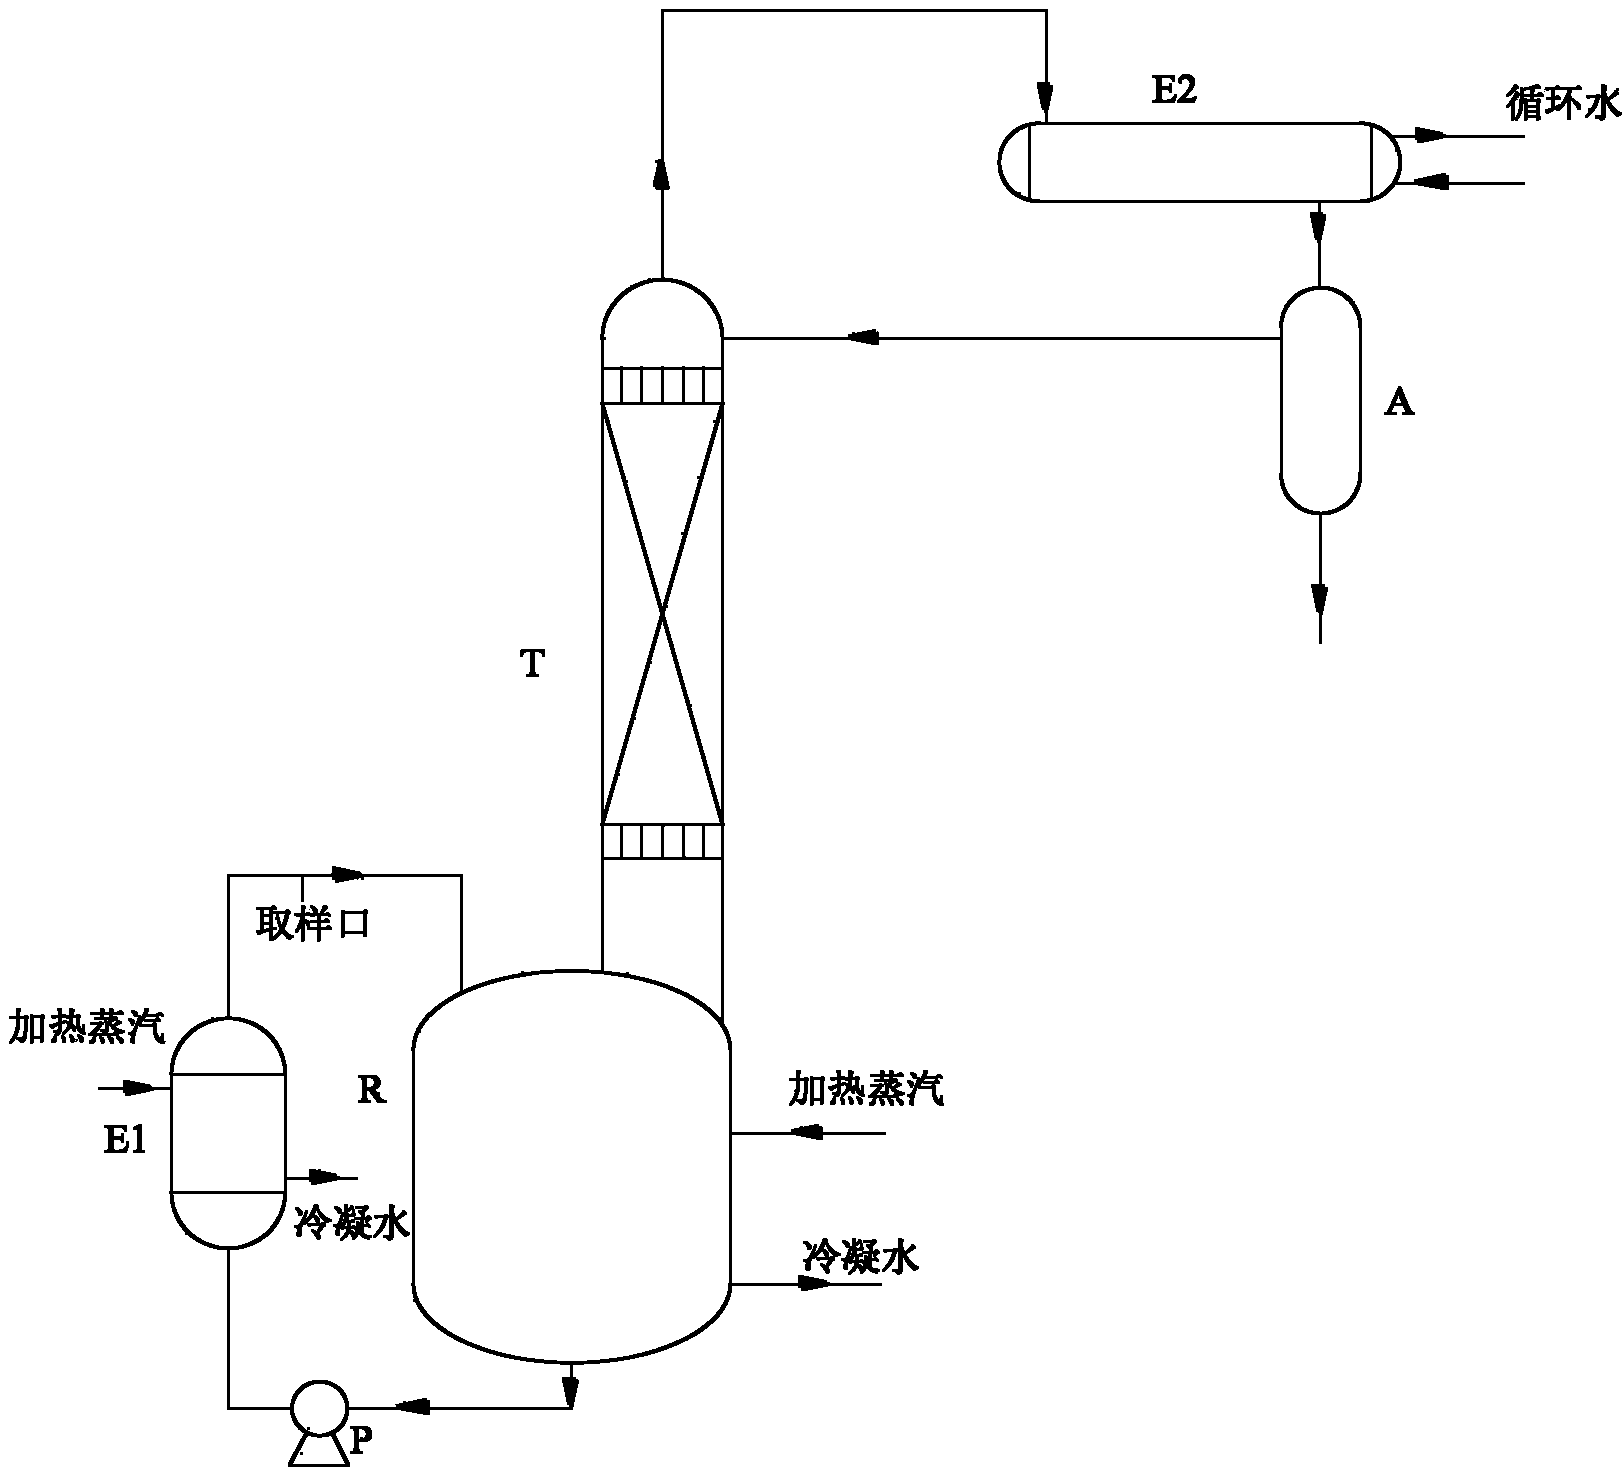 Device and method for shortening ketalation time in ibuprofen synthesis process